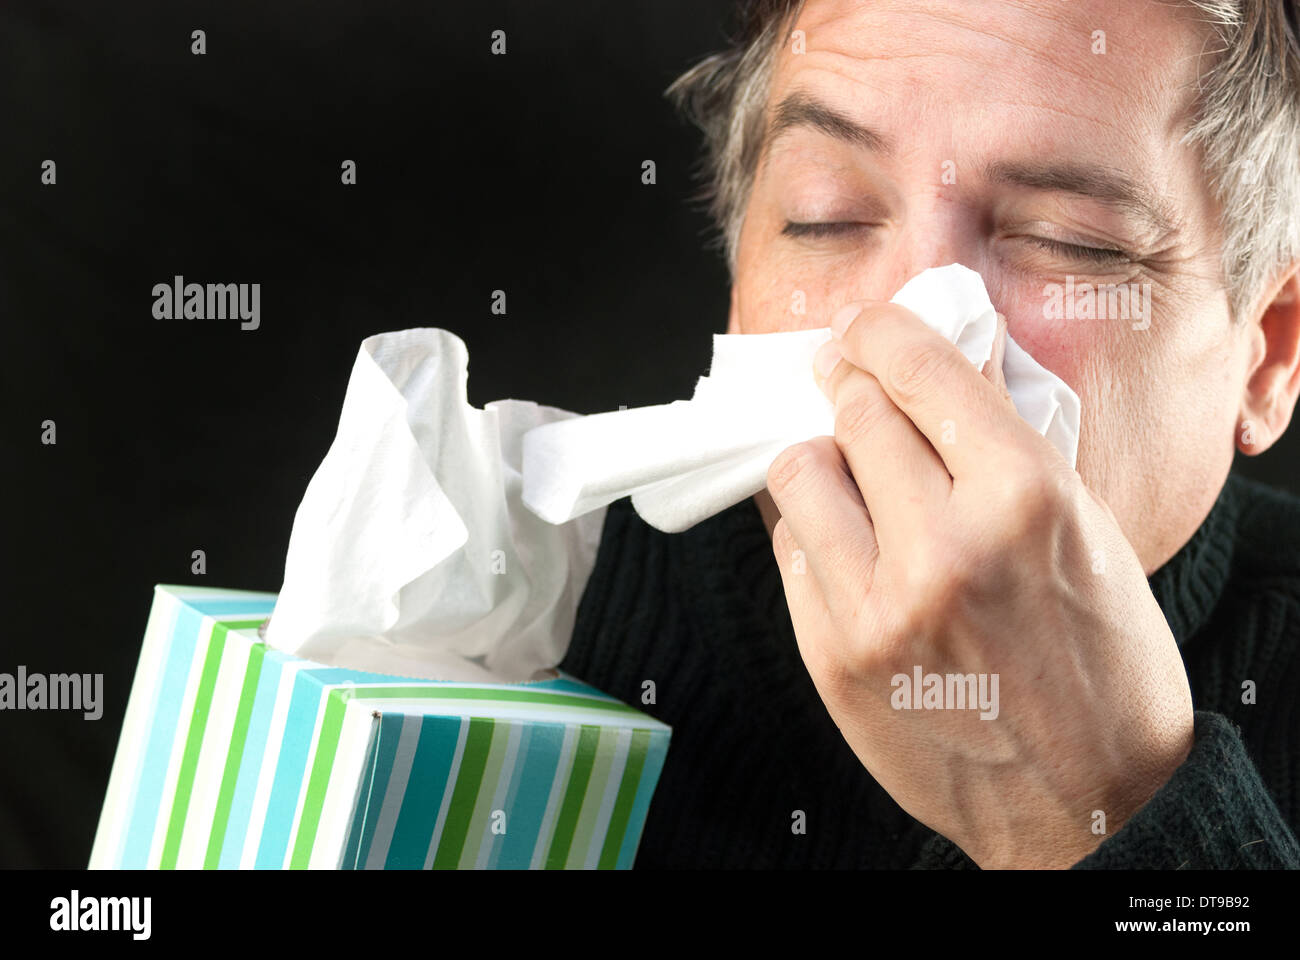 Close-up of a man blowing his nose while holding a tissue box. Stock Photo